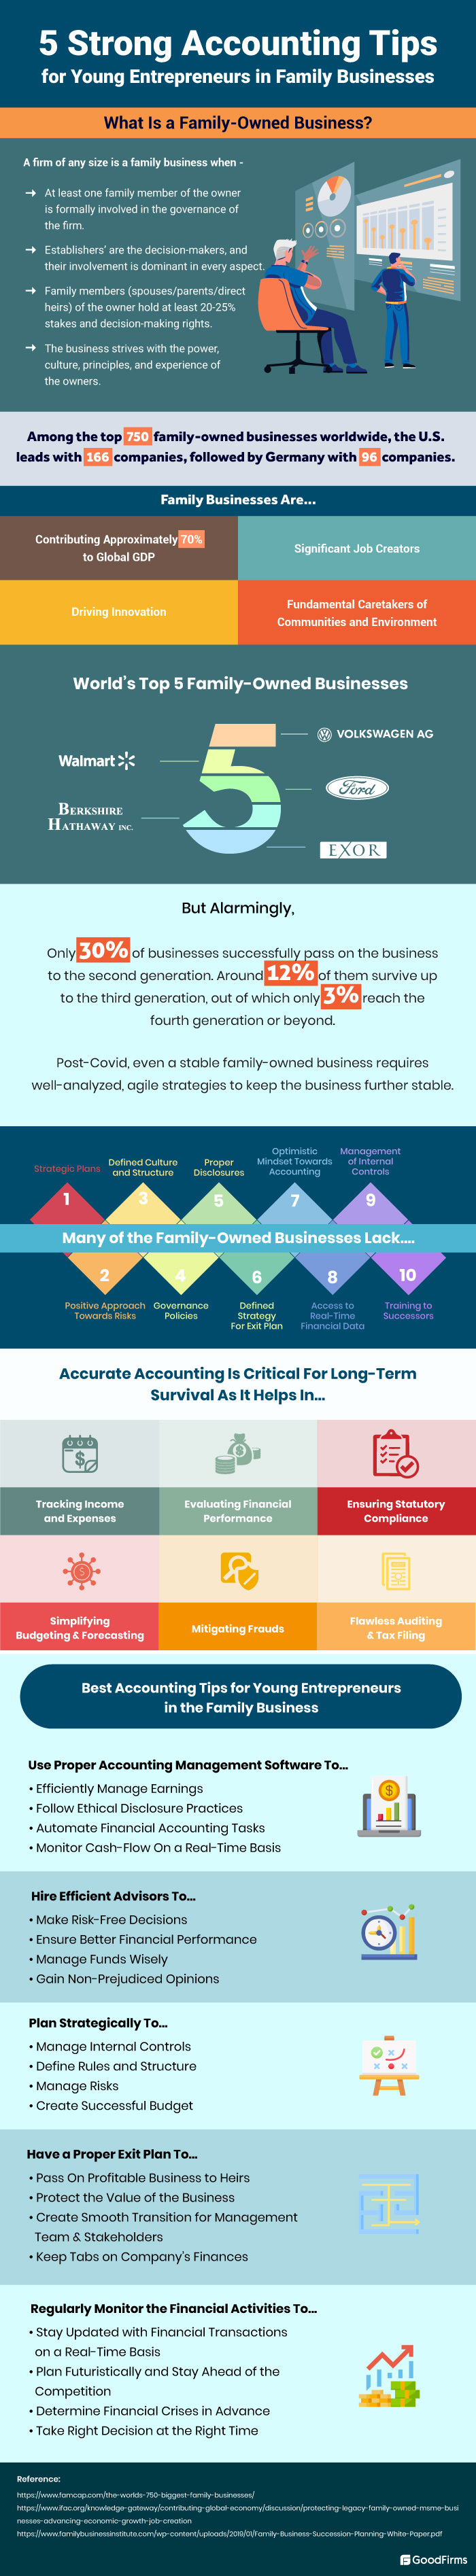 Accounting Tips for Young Entrepreneurs in Family Business